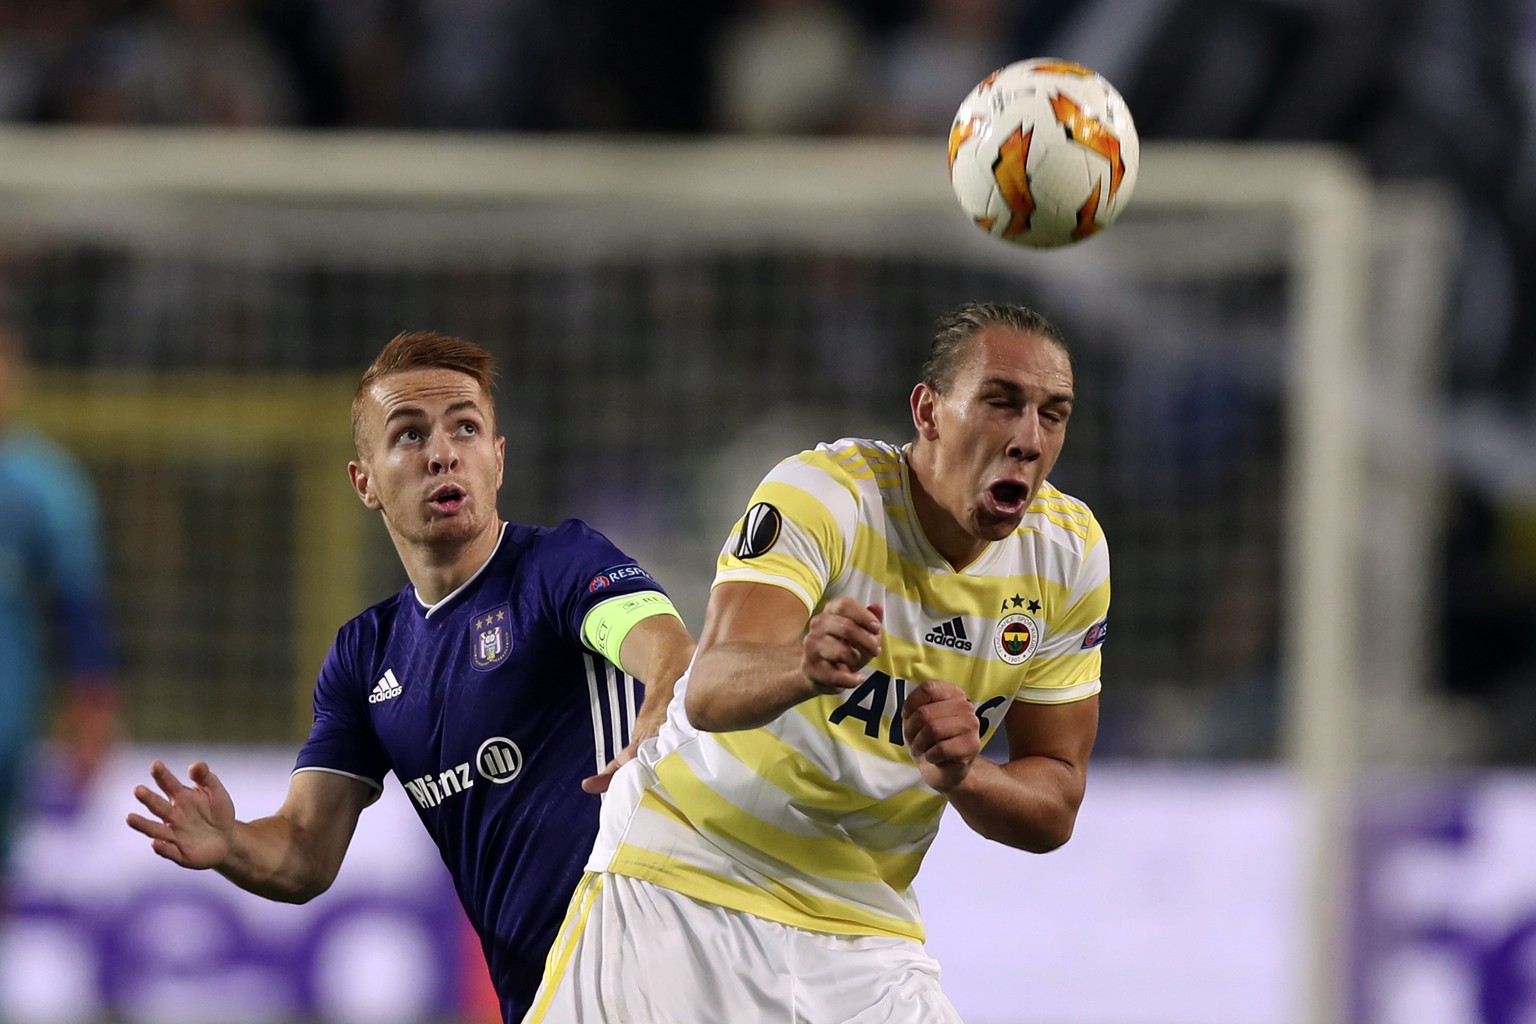 Fenerbahce&#039;s Michael Frey, right, goes for a header with Anderlecht&#039;s Adrien Trebel during the Europa League Group D soccer match between Anderlecht and Fenerbahce at the Constant Vanden Sto ...